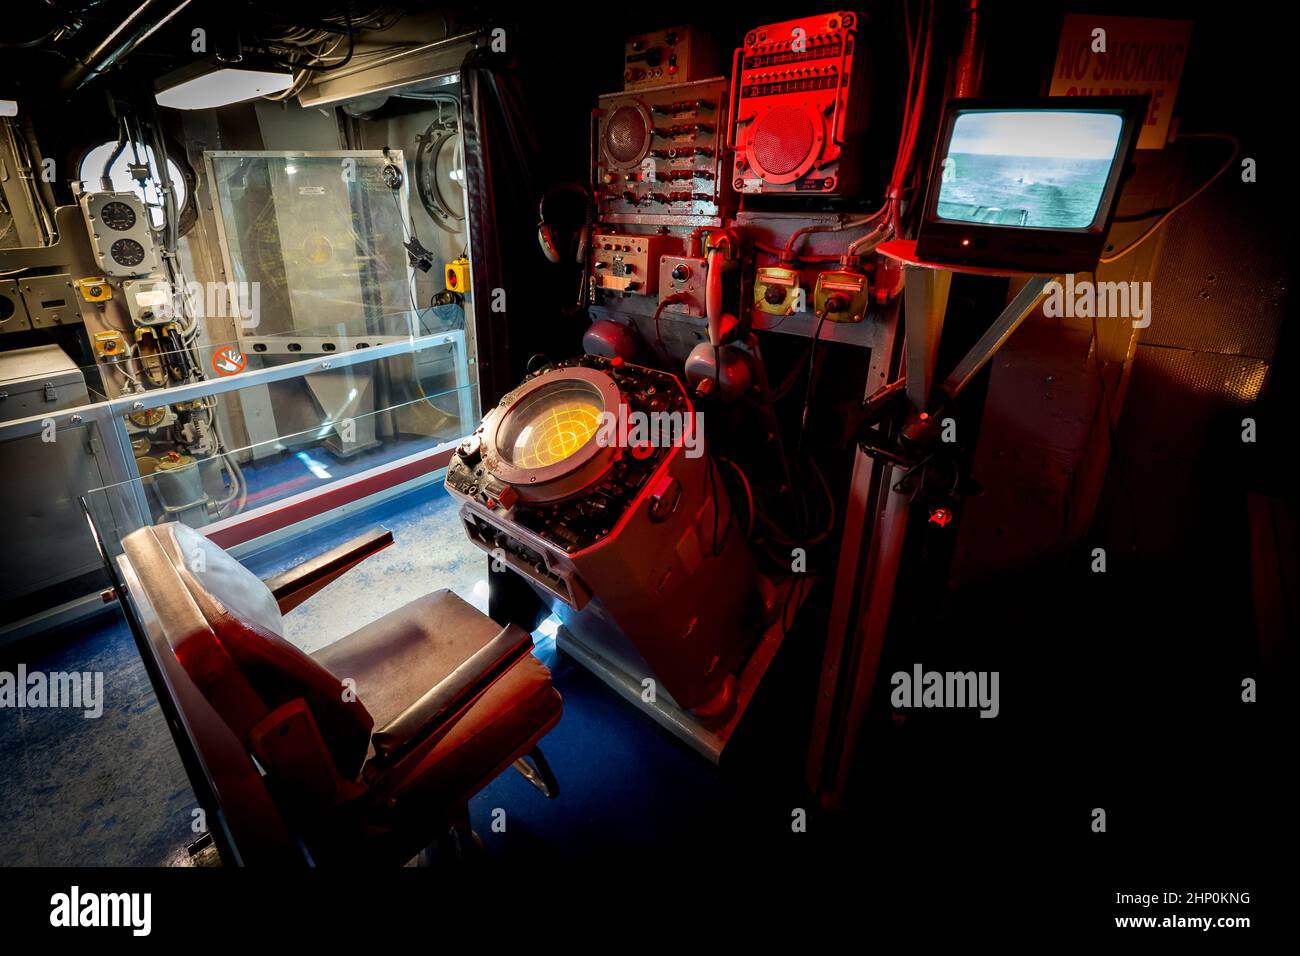 View of the working station of the PAR approach controller aboad the USS Intrepid aircraft carrier, Intrepid Sea, Air and Space Museum, New York, USA Stock Photo